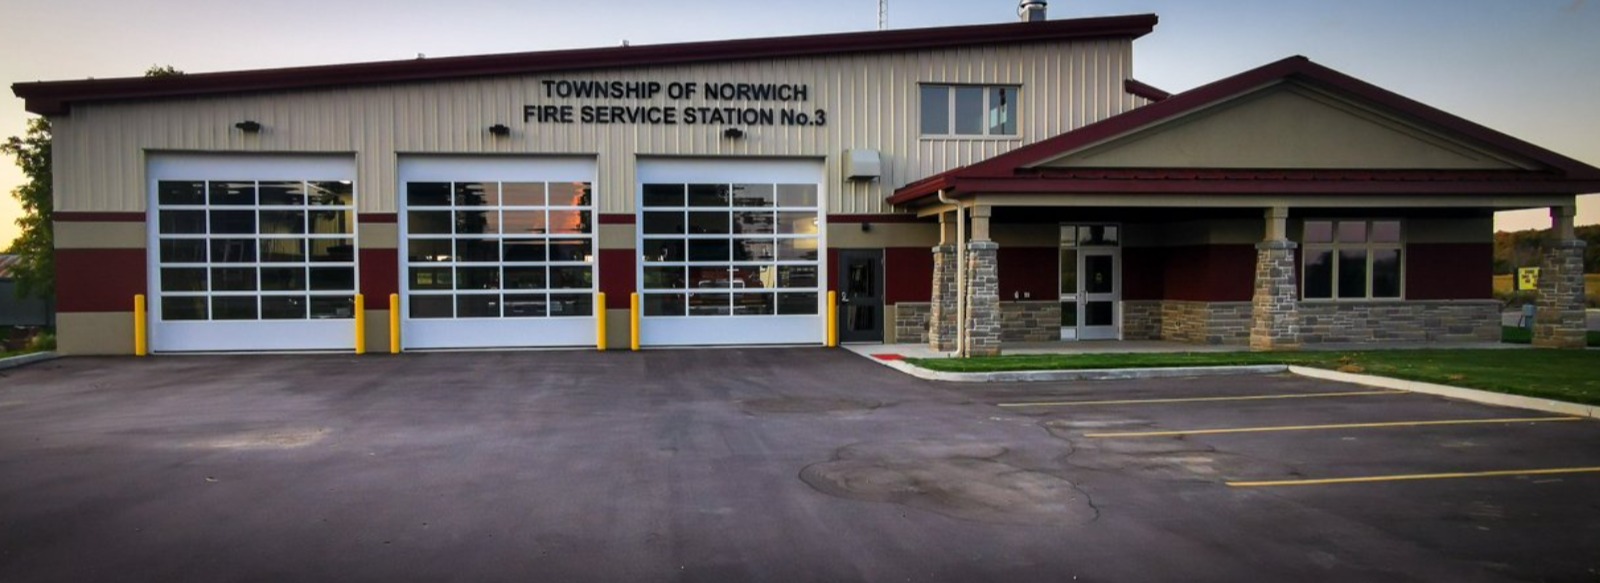 fire station 3